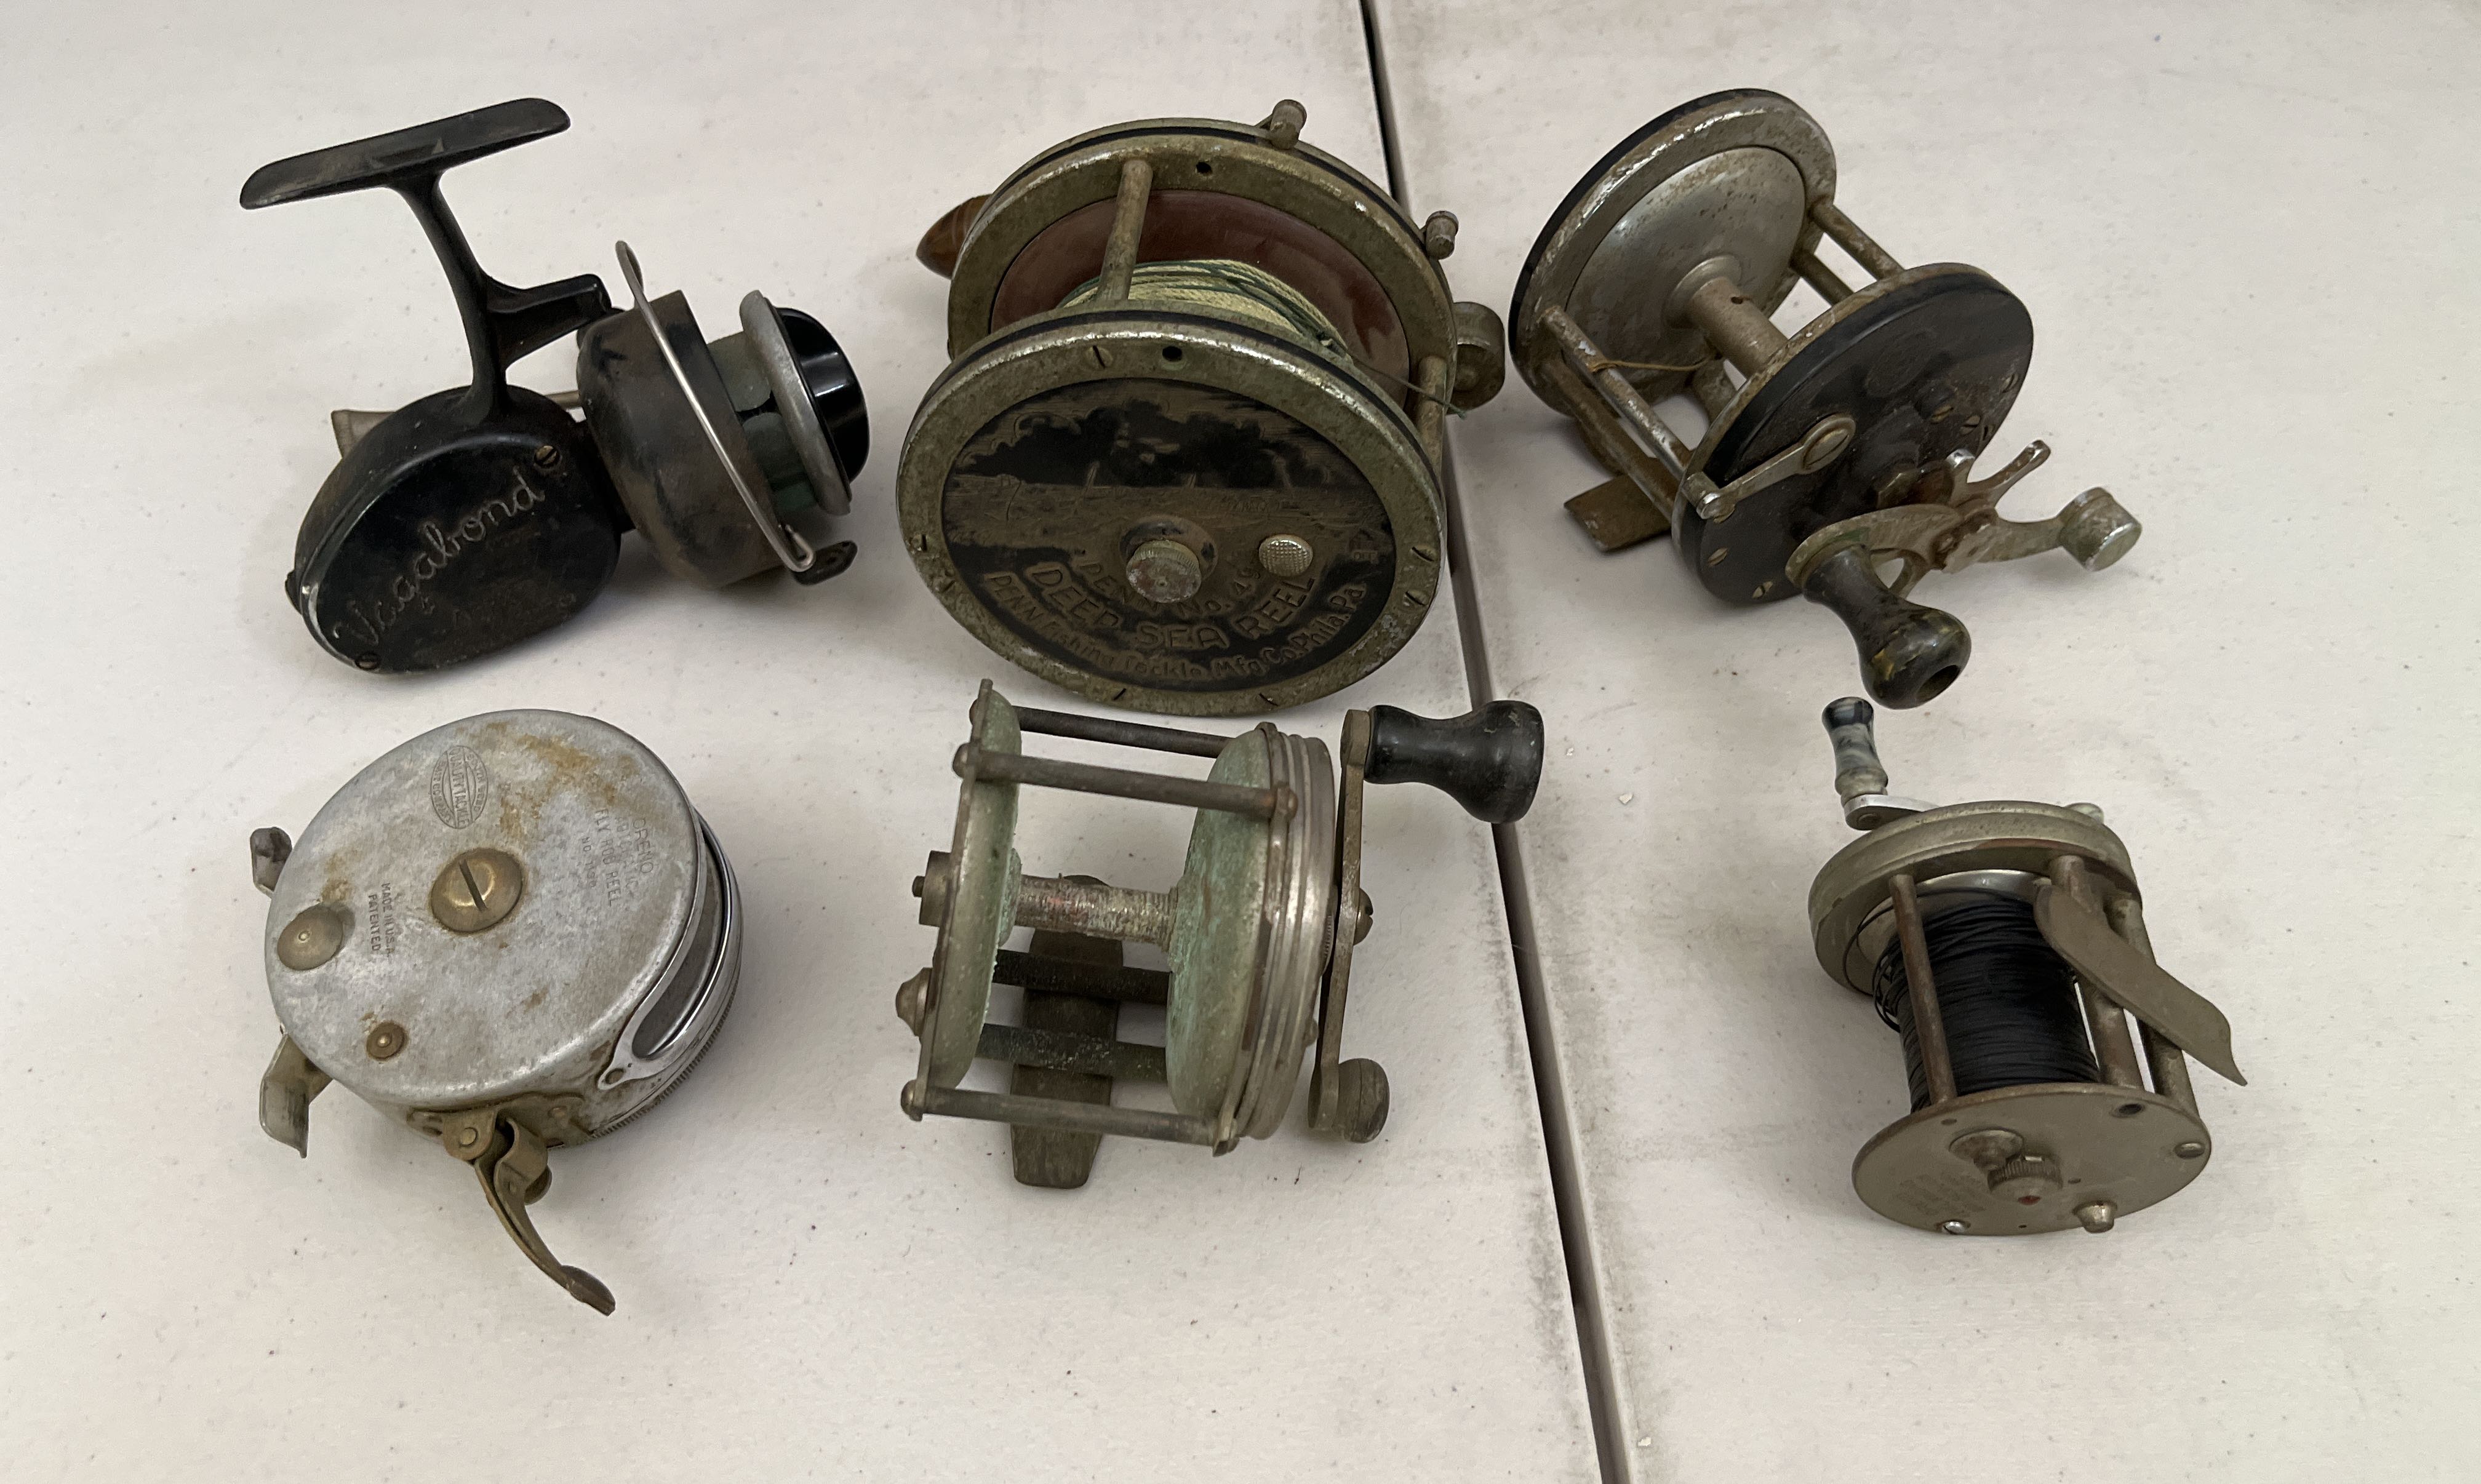 Antique and Vintage Fishing Reels